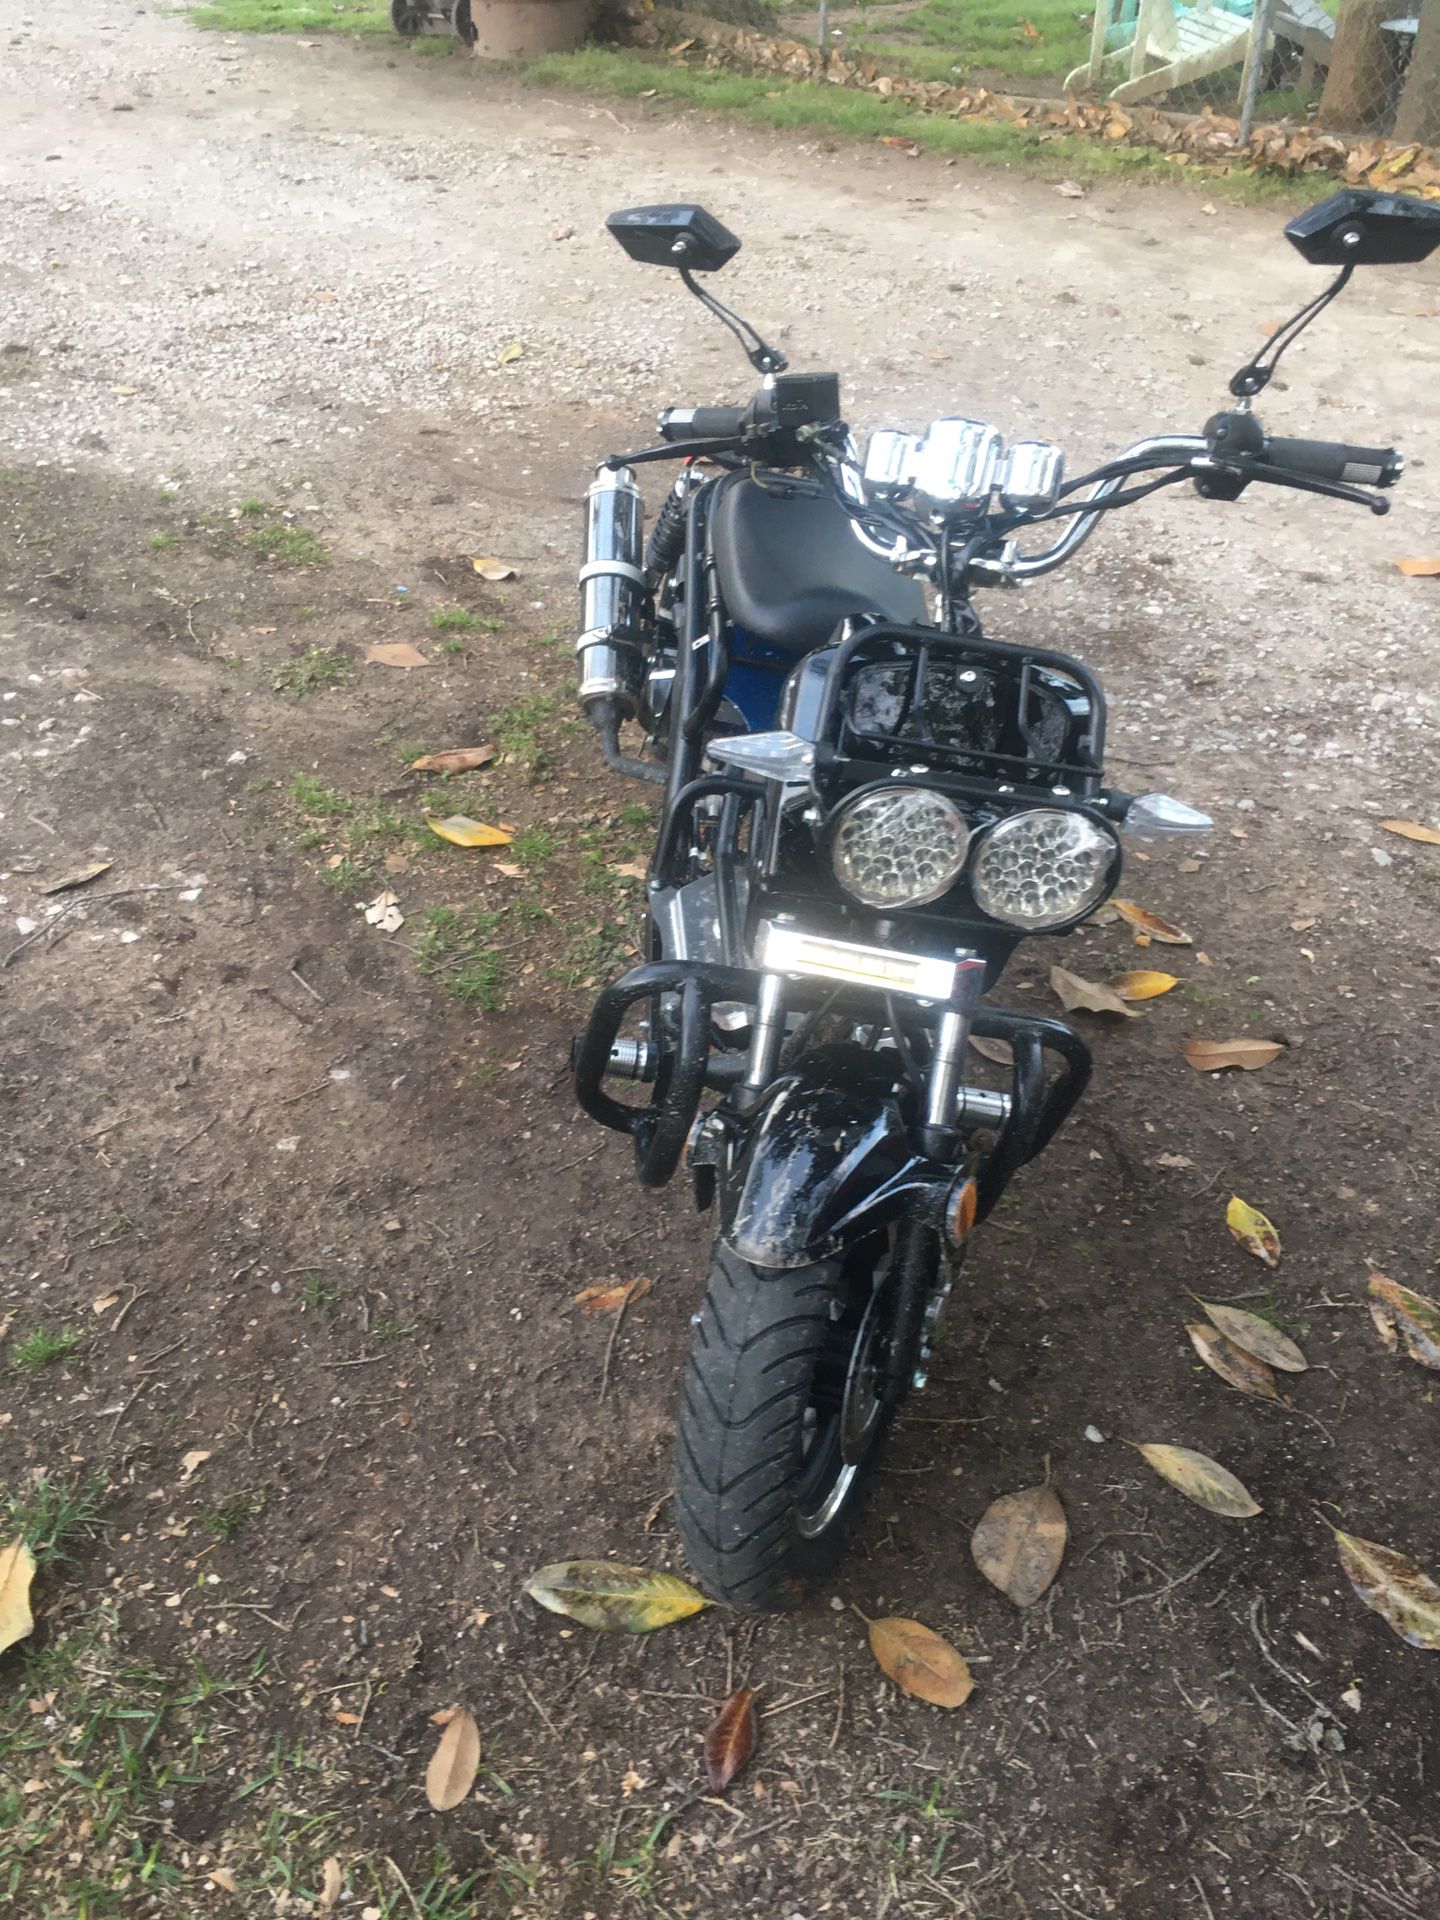 Photo Yes Brand New Just Off The Lot150cc Moped The Vin Number Is L2BB3BCH6LM823021p And All Im Asking iOS What I Payed For The Bike That Would Be About